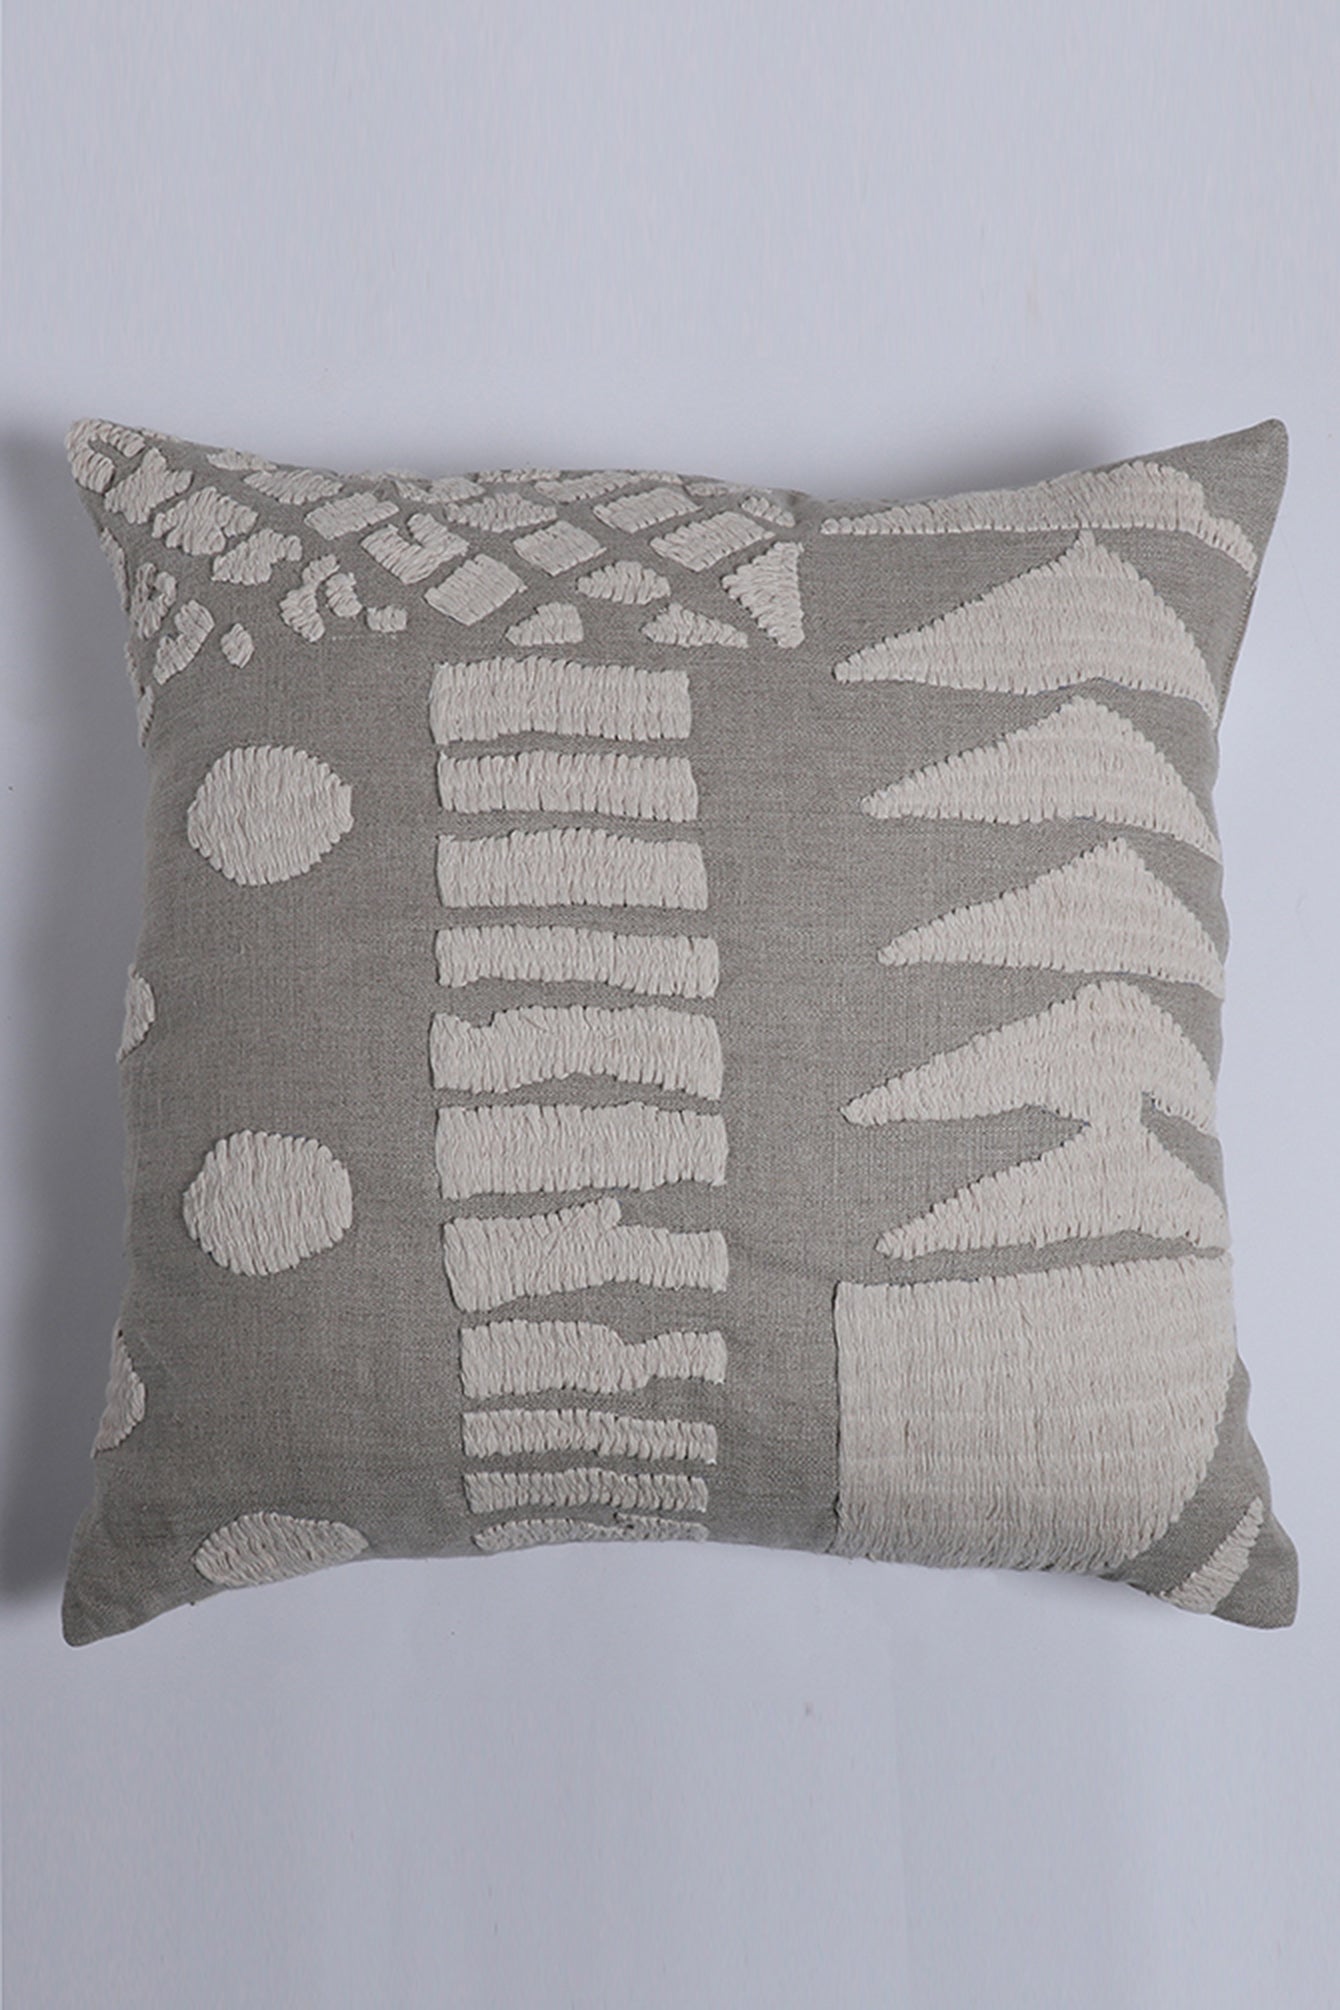 Krichim Embroidered Cushion Cover